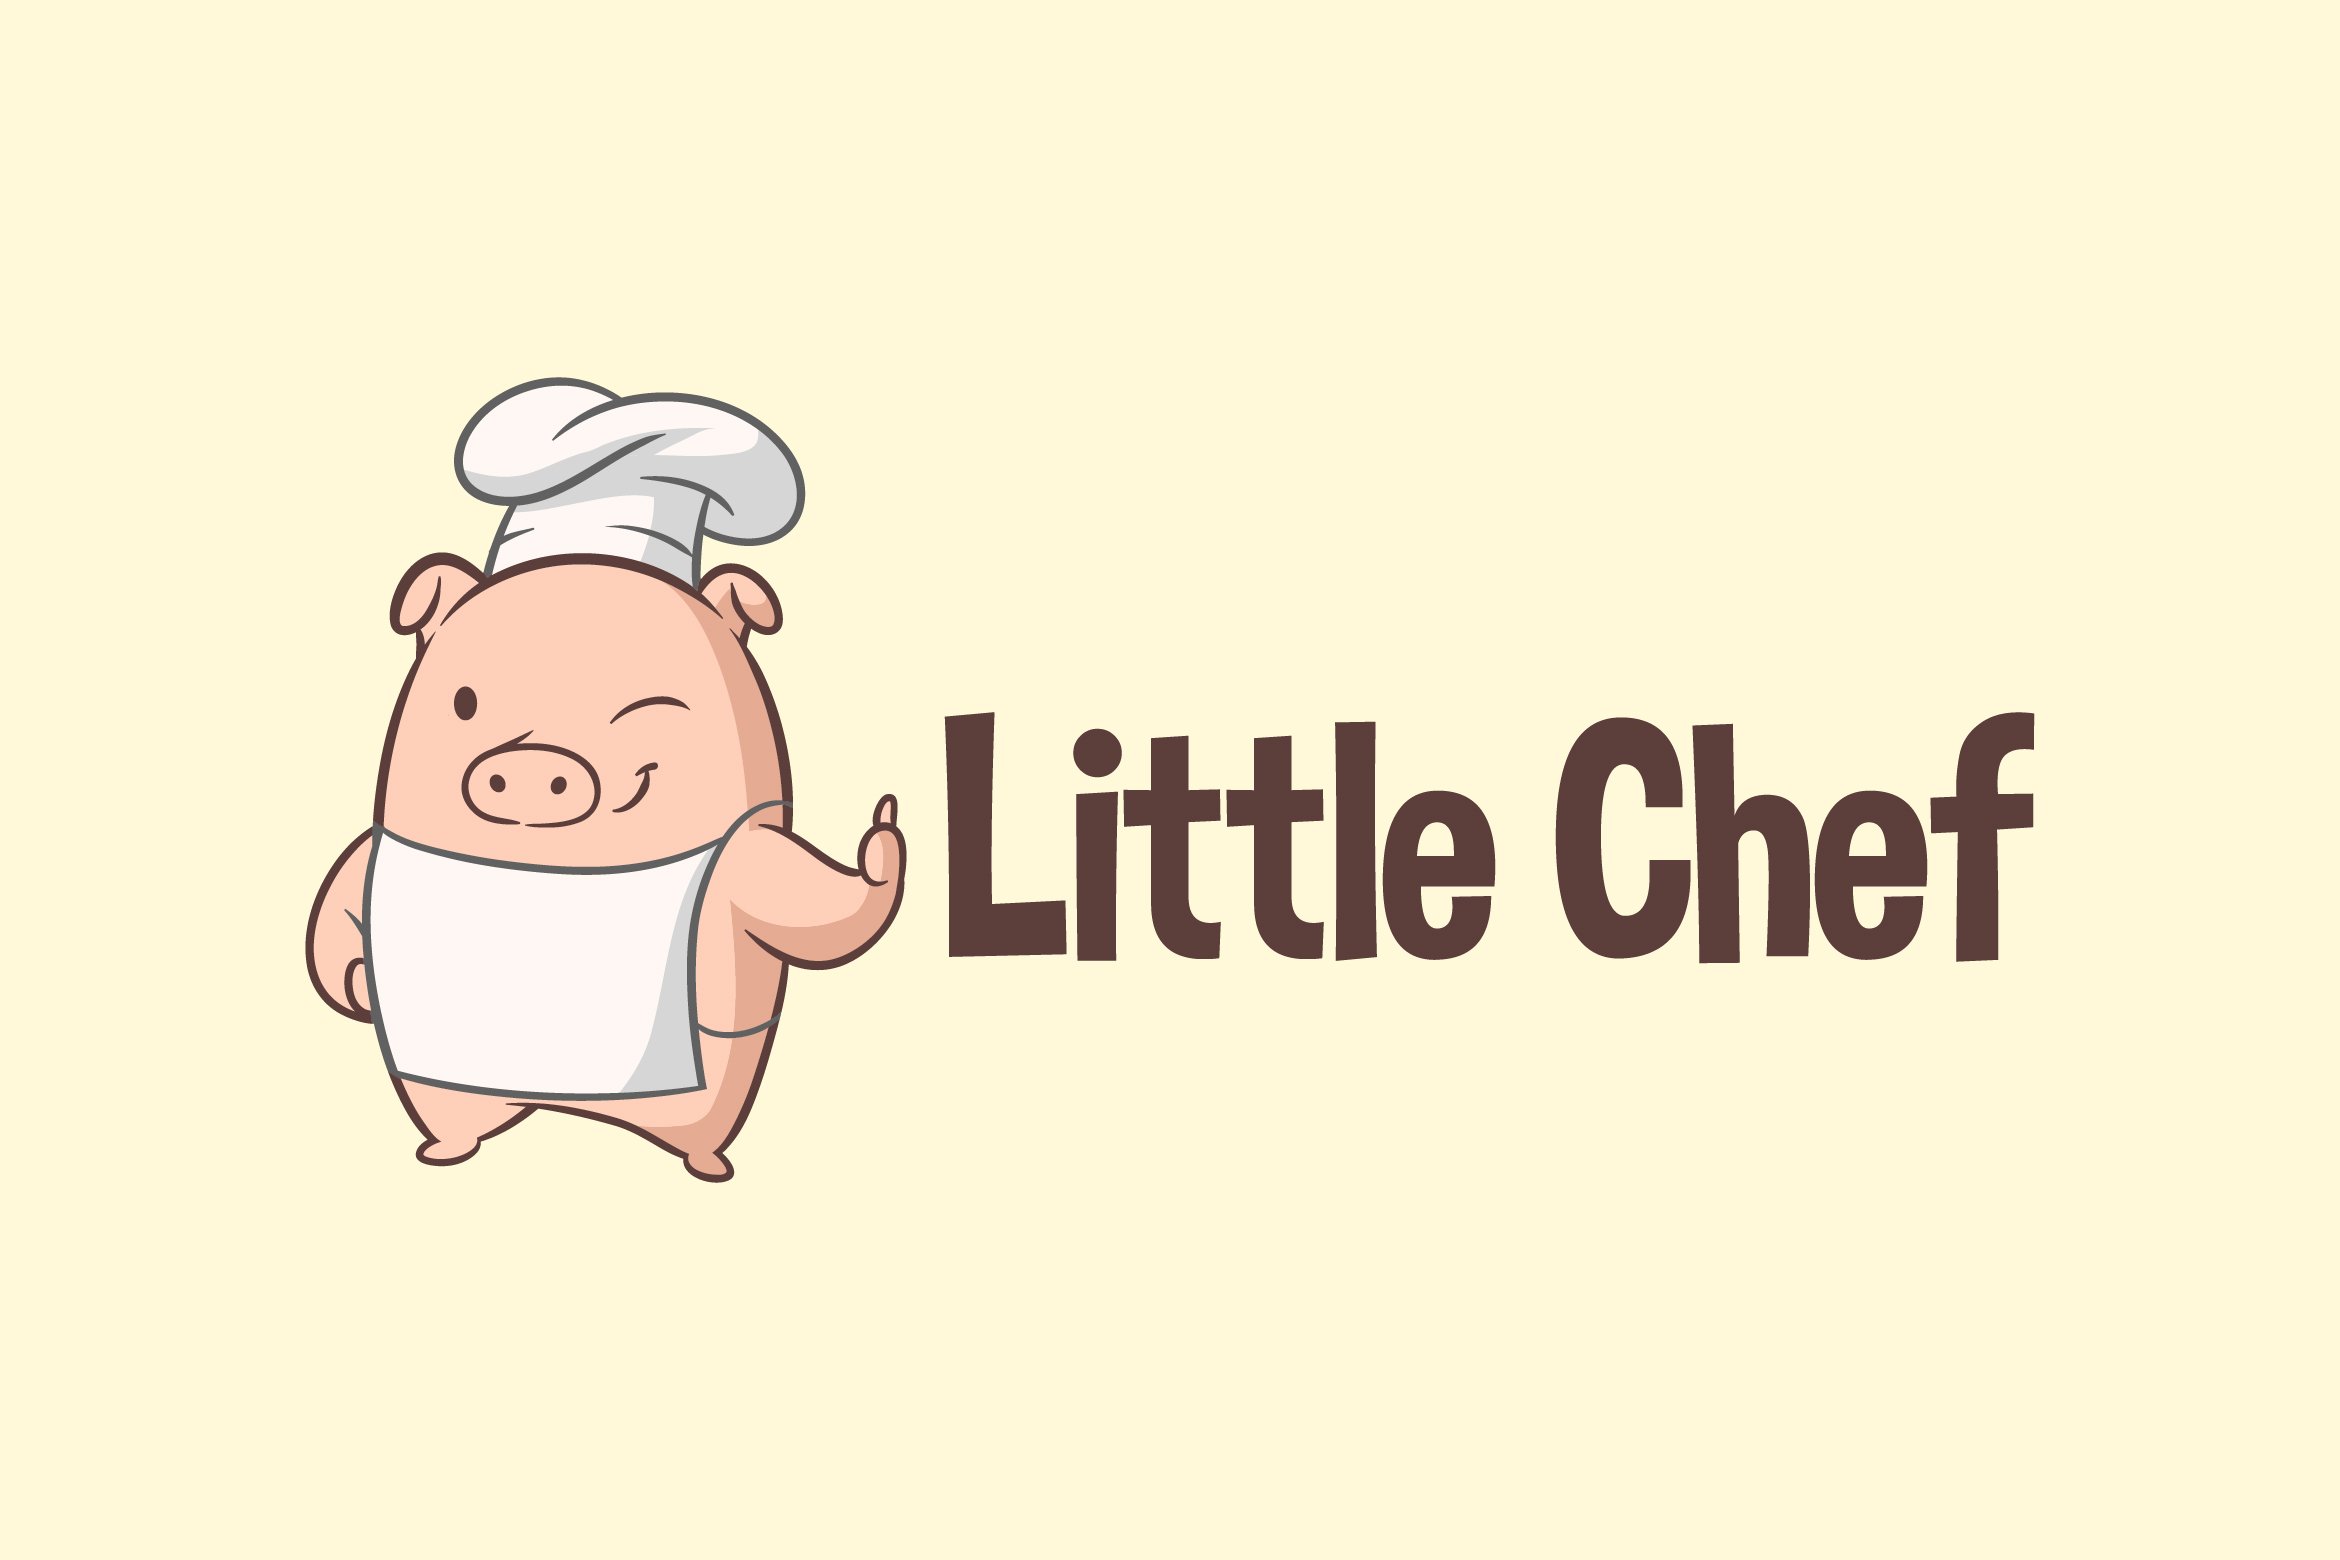 Little Chef Logo cover image.